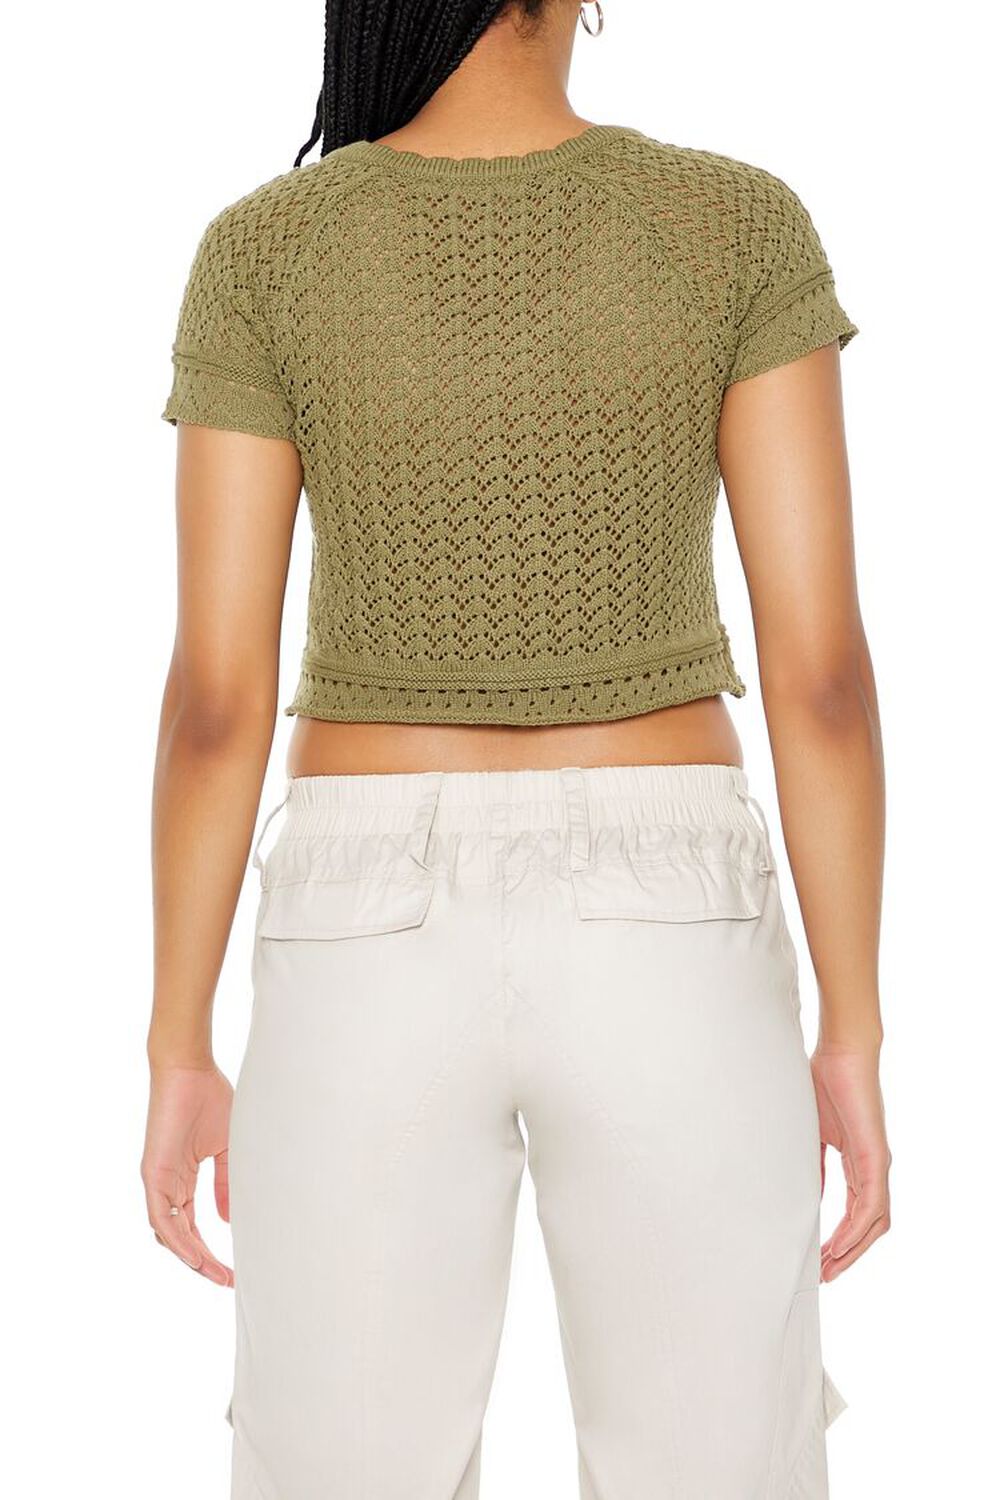 OLIVE Sweater-Knit Crochet Crop Top, image 3